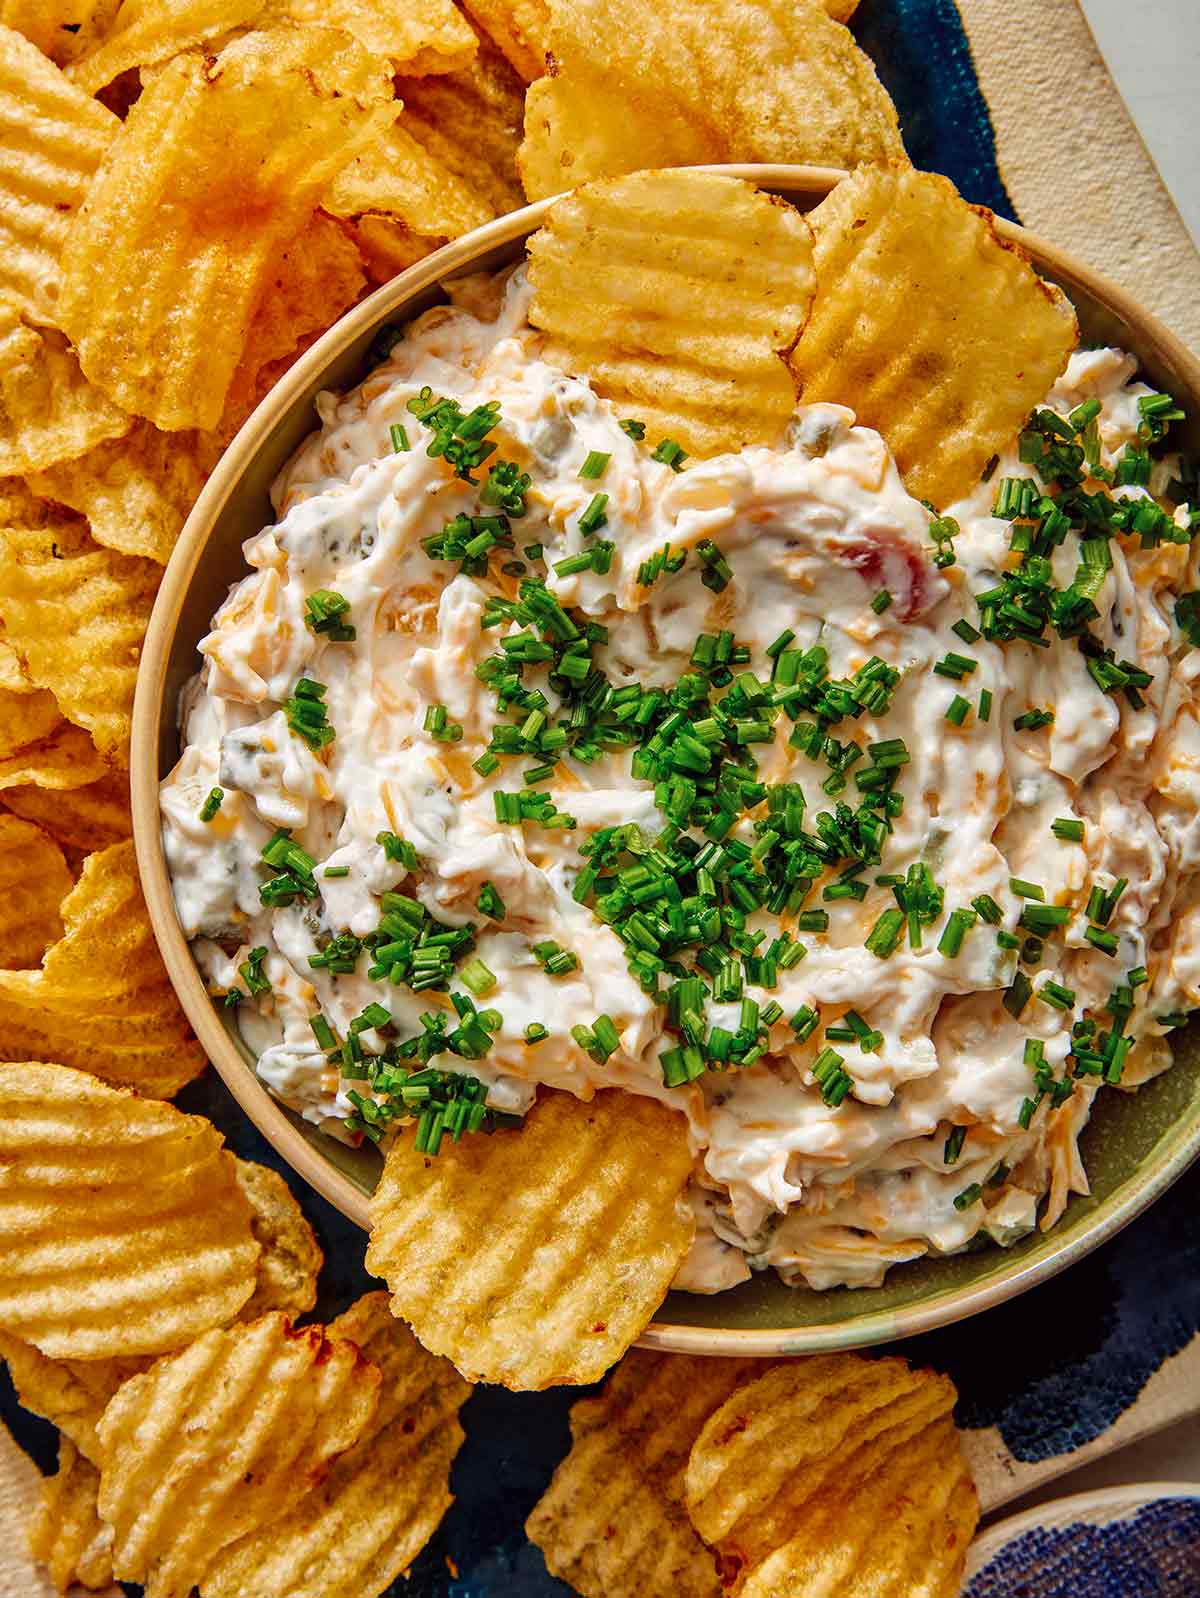 Baked potato dip in a bowl with some potato chips dipped in it.